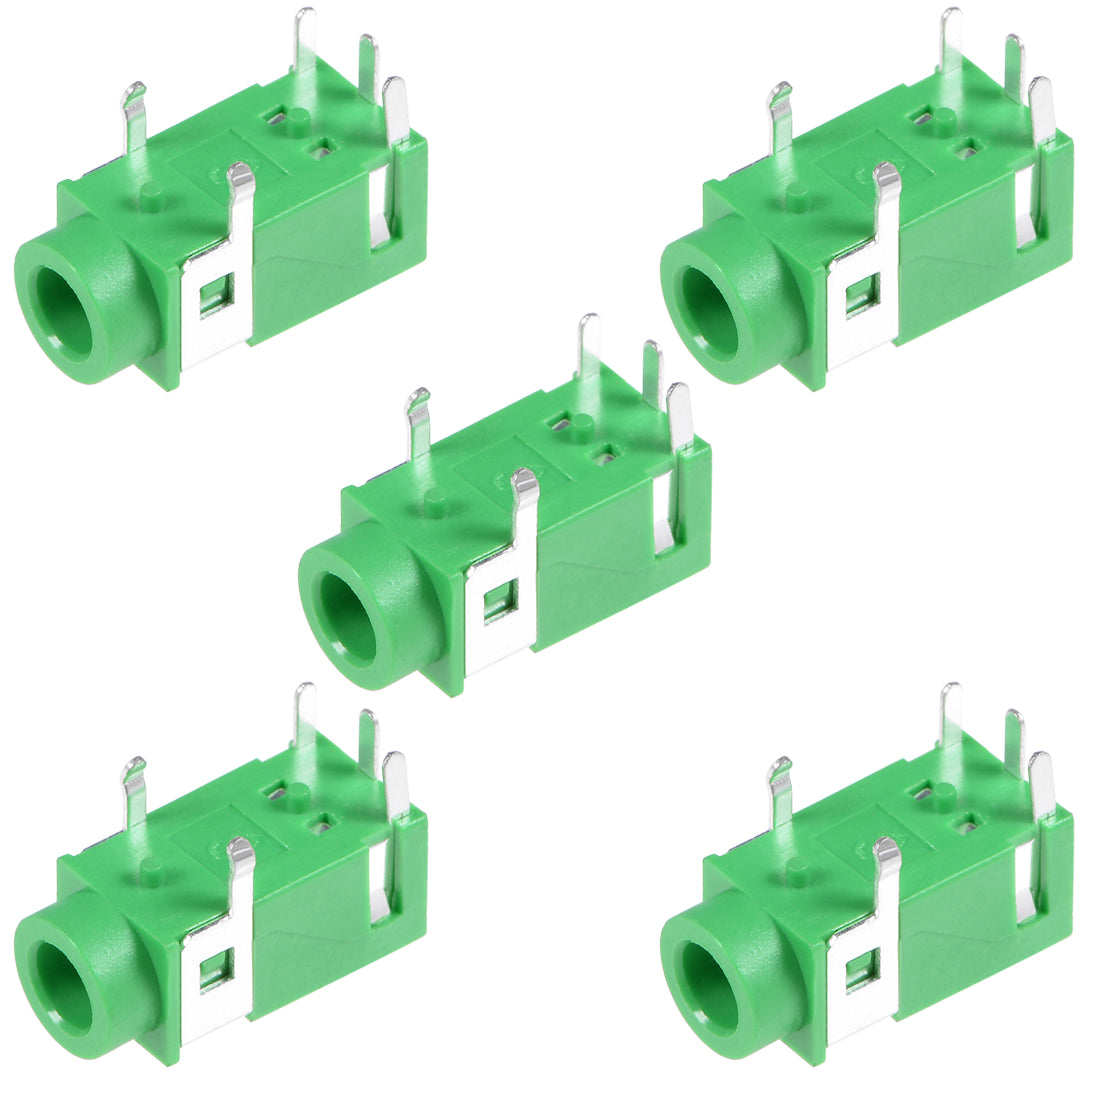 uxcell Uxcell 5Pcs PCB Mount 3.5mm 5 Pin Socket Headphone Stereo Jack Audio Video Connector Green PJ322